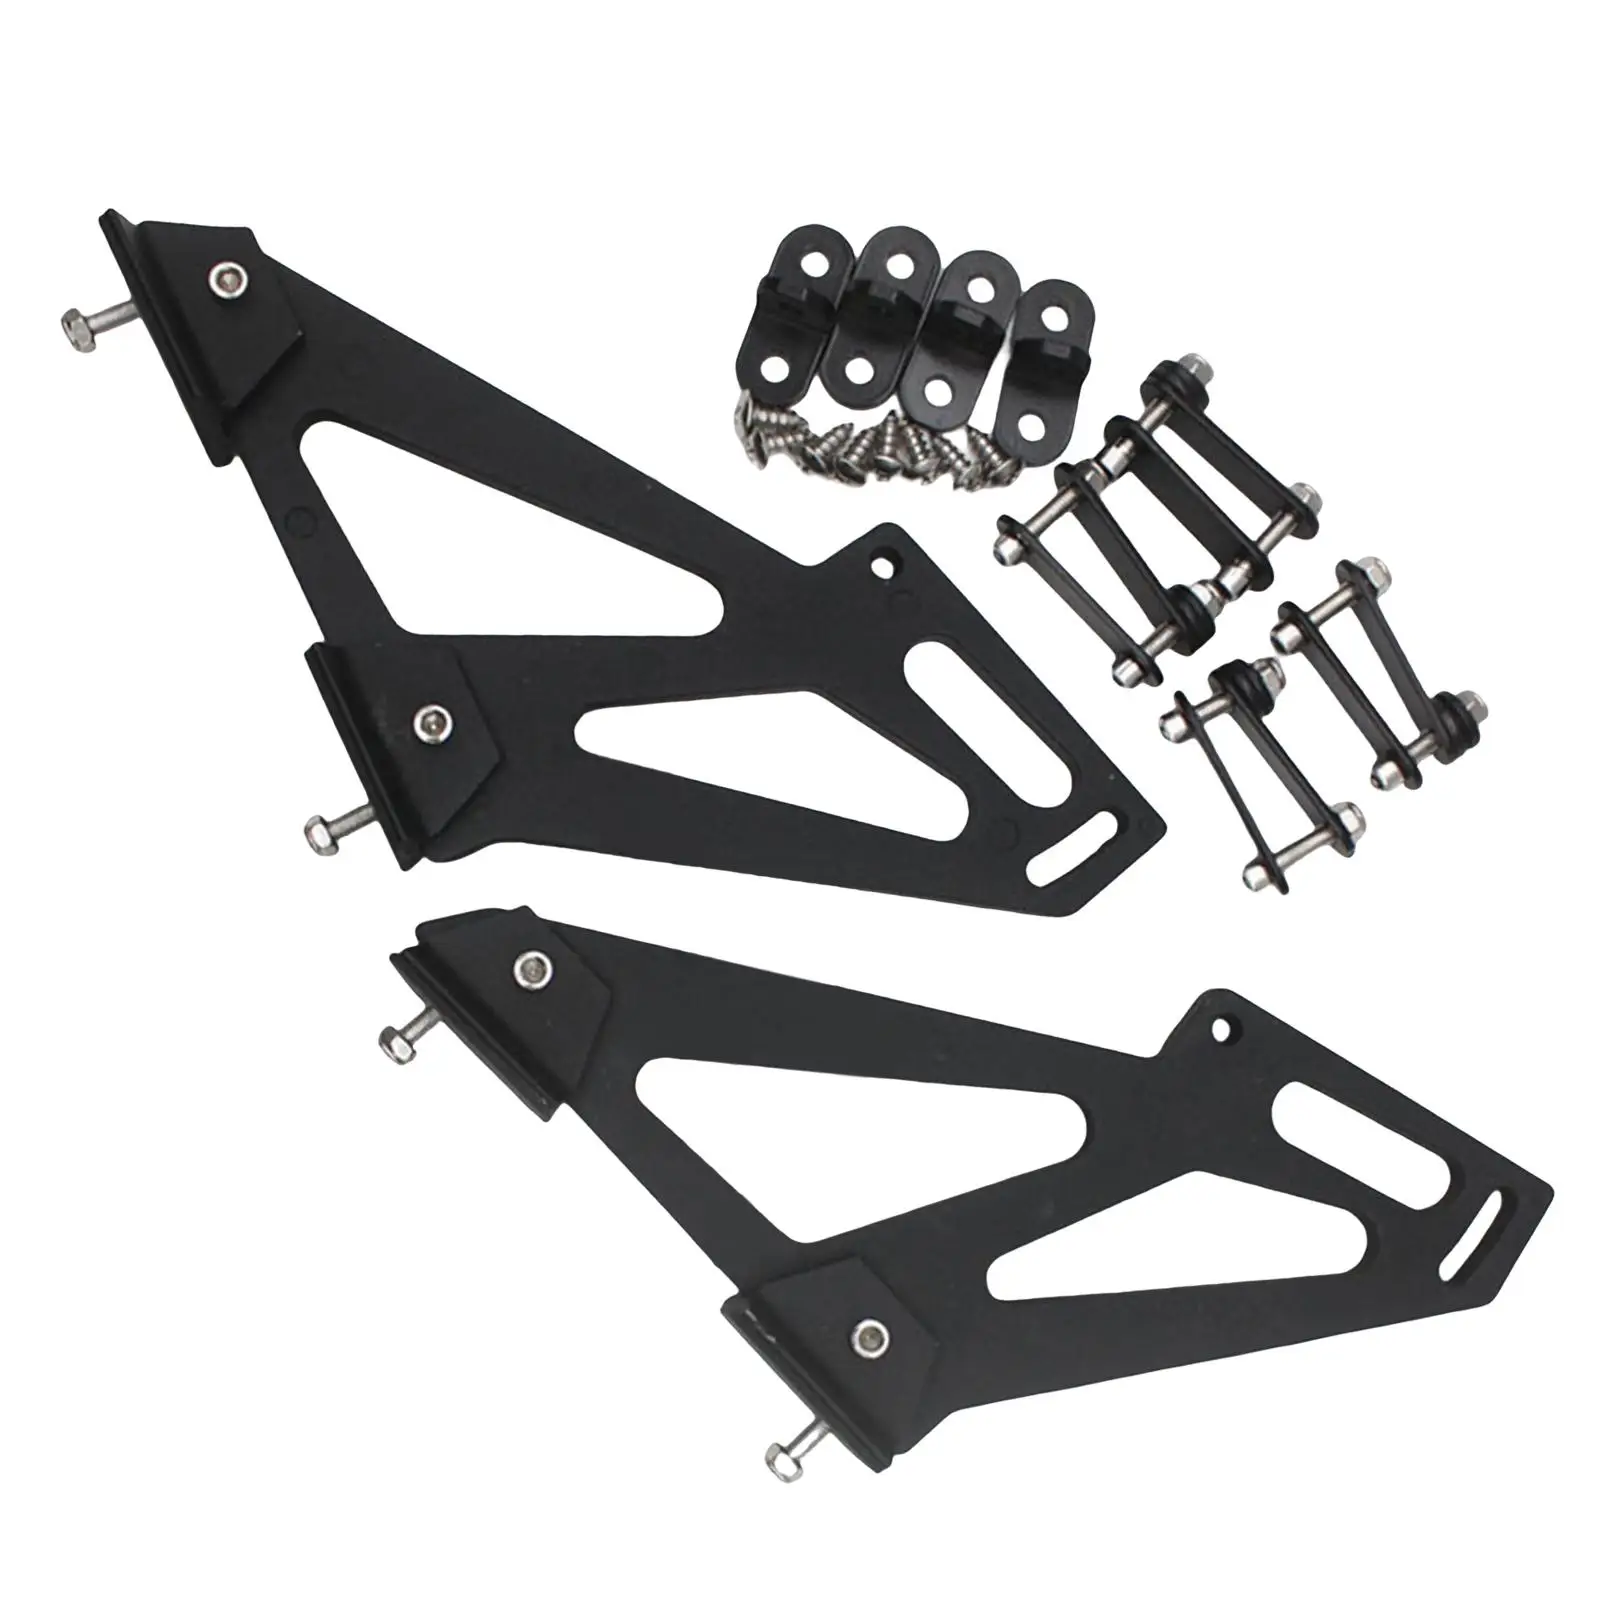 Spoiler Legs Mount Brackets Aluminum Alloy Replacement accessory Professional Durable Car Rear Wing Trunk Racing Tail